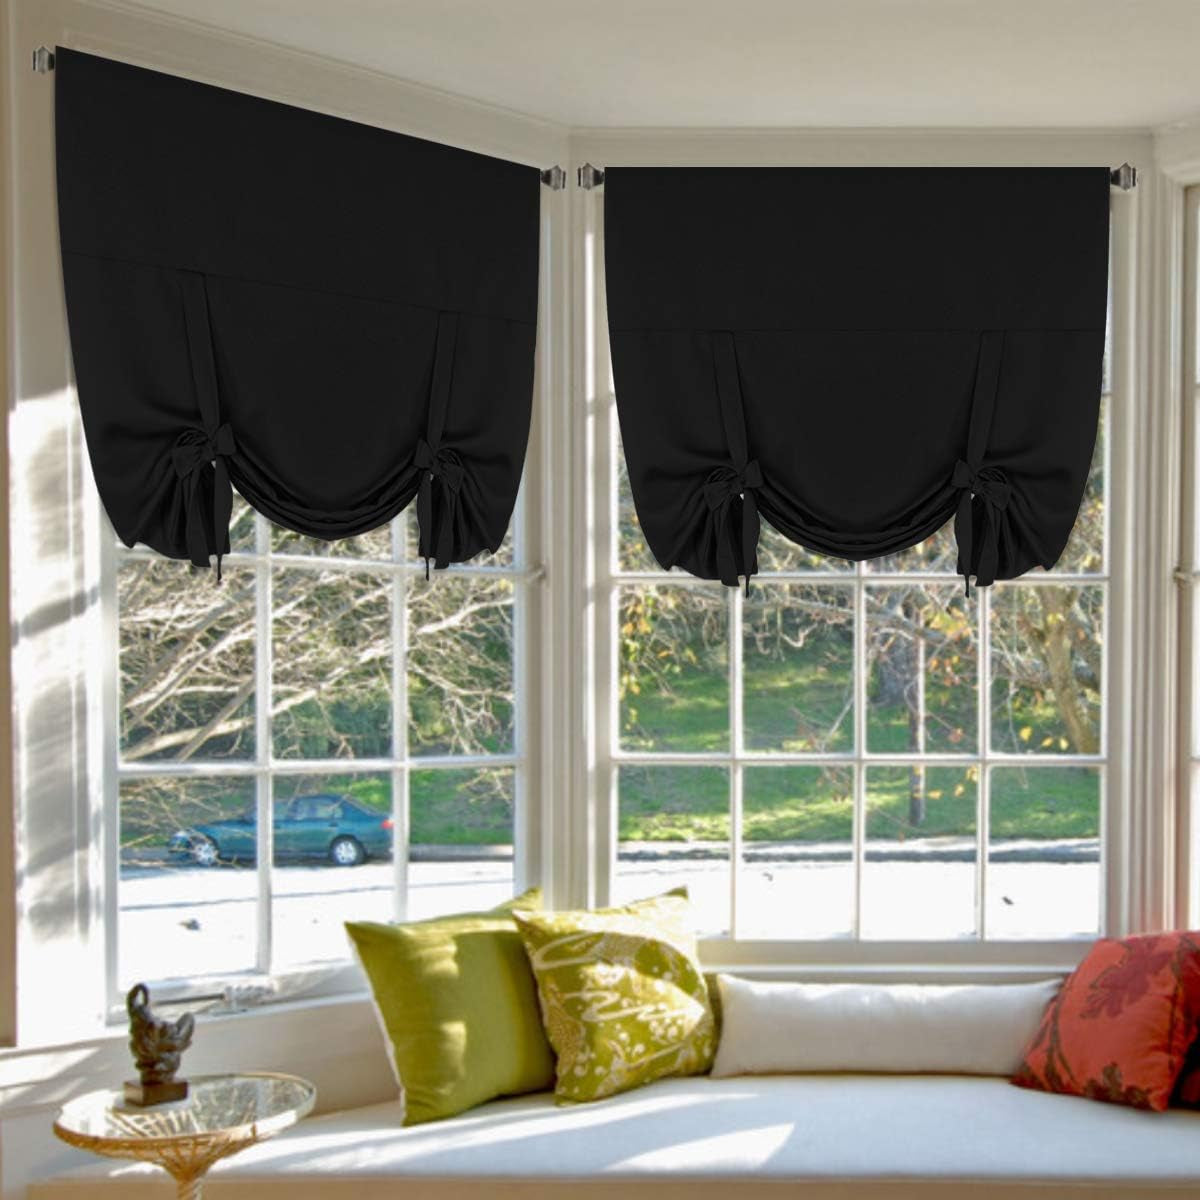 H.VERSAILTEX Tie up Curtain Thermal Insulated Room Darkening Rod Pocket Valance for Bedroom (Coral, 1 Panel, 42 Inches W X 63 Inches L)  H.VERSAILTEX Jet Black W42" X L63" 2-Pack 